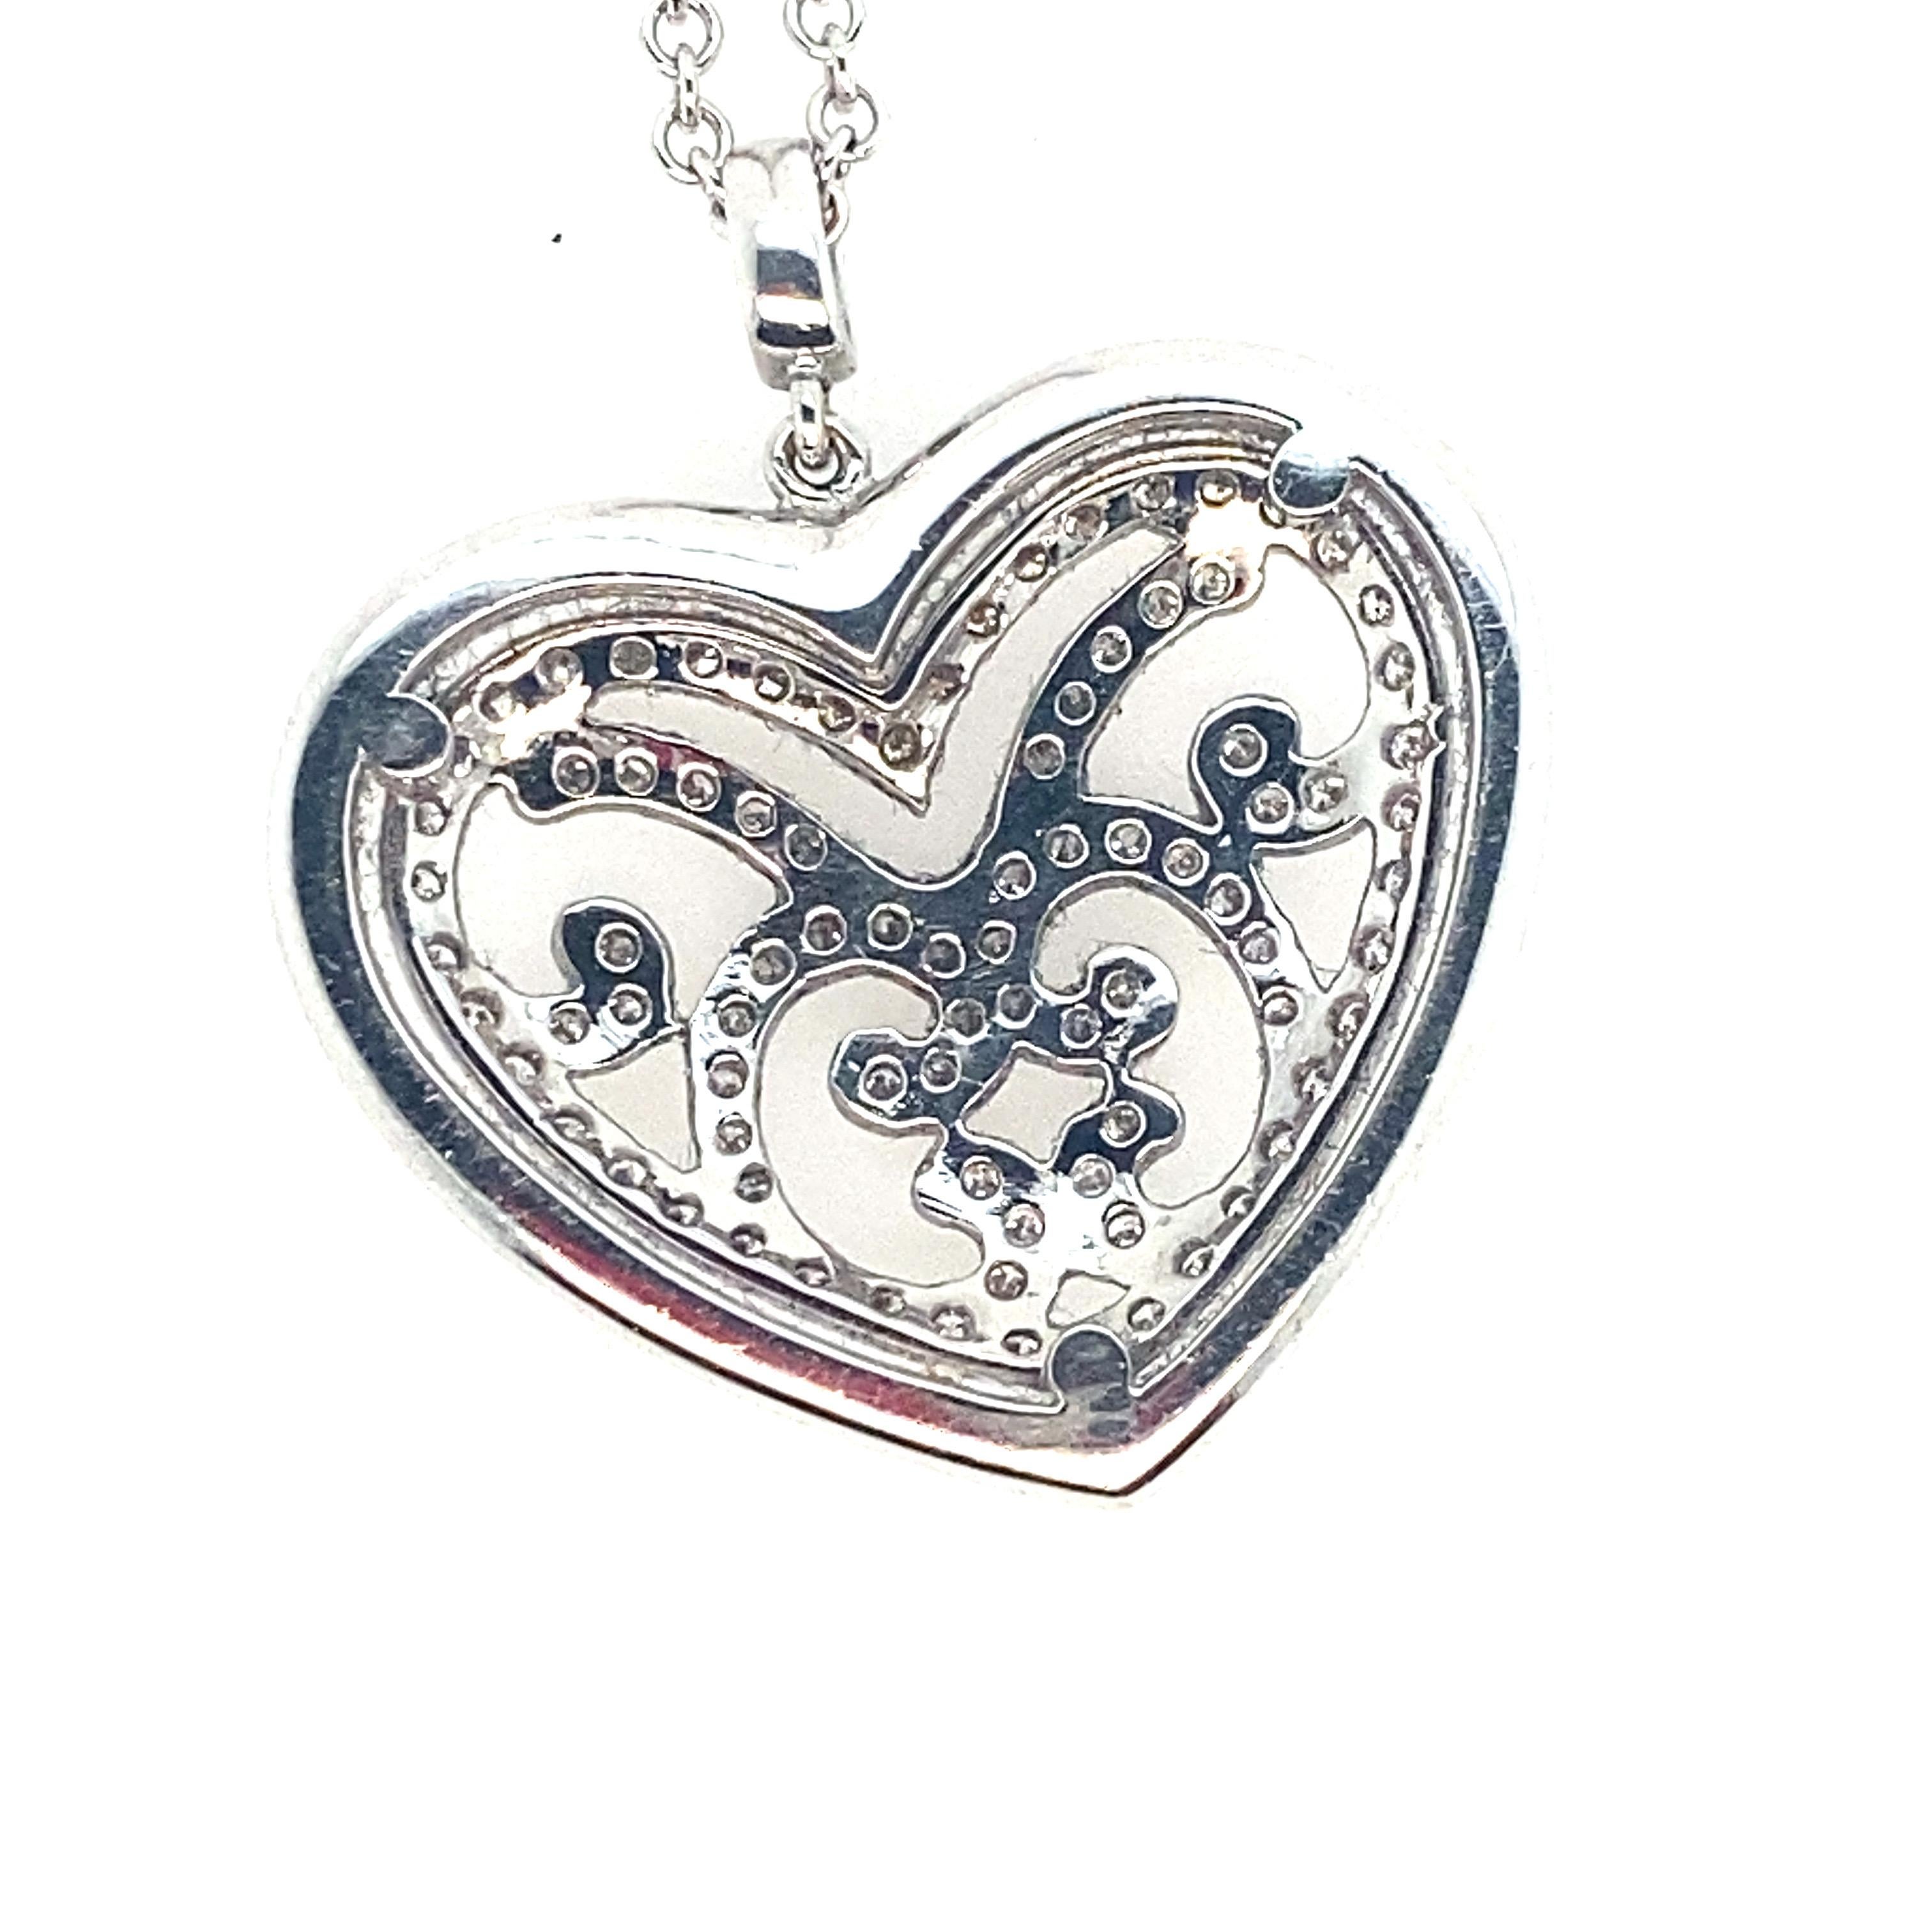 A wonderful, unusal, 18kt and diamond heart pendant.  The pendant has 1.00 cts of round, brilliant diamonds that are H color, VS2-SI1 clarity.  It is not your ordinary heart pendant.  The design is sophisticated and a good medium size.  It is on a